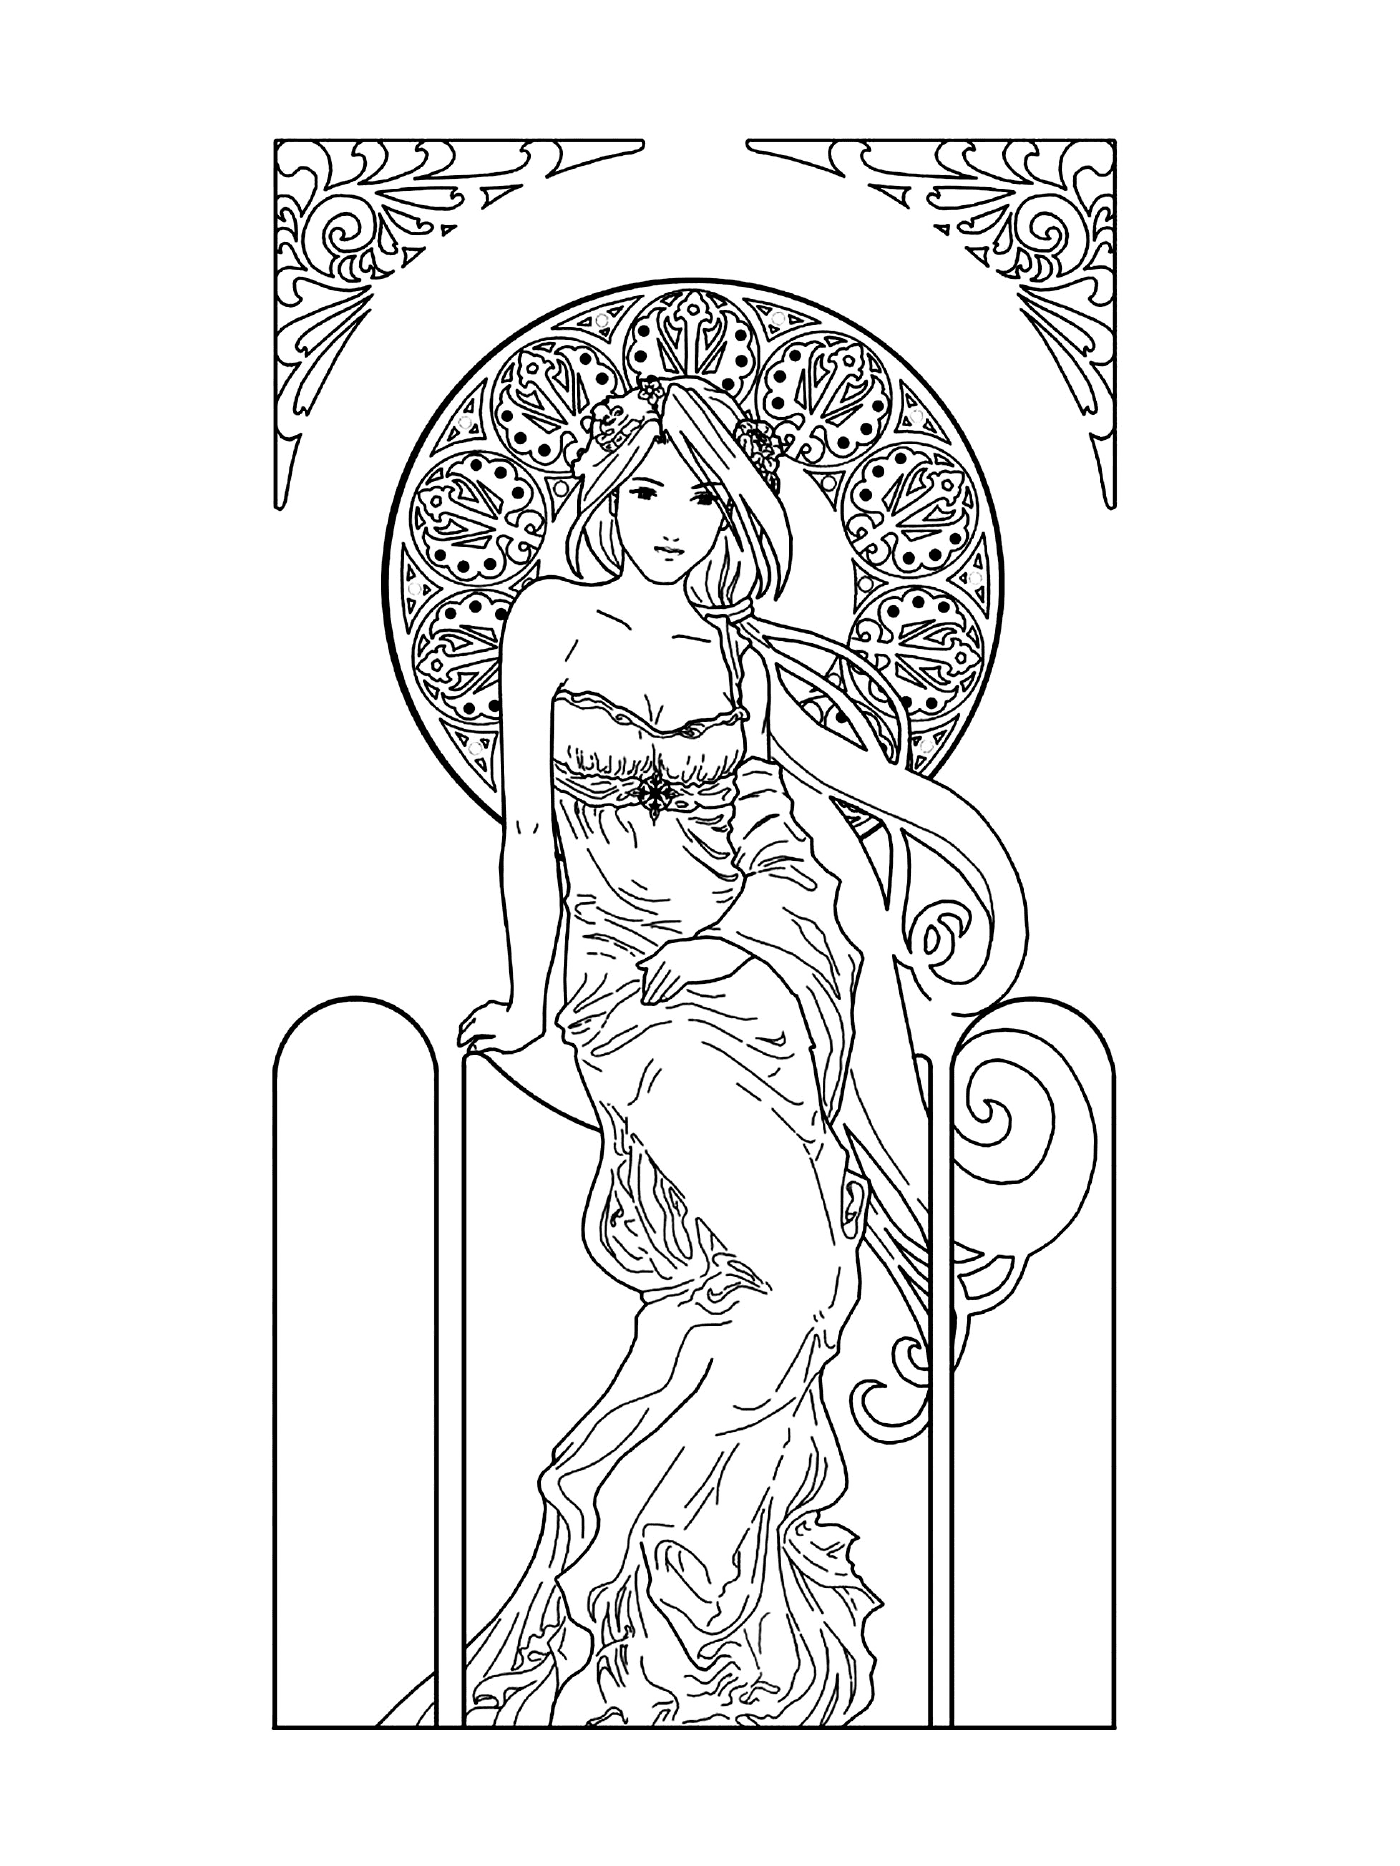  a woman sitting on a chair in a dress in the art nouveau style 